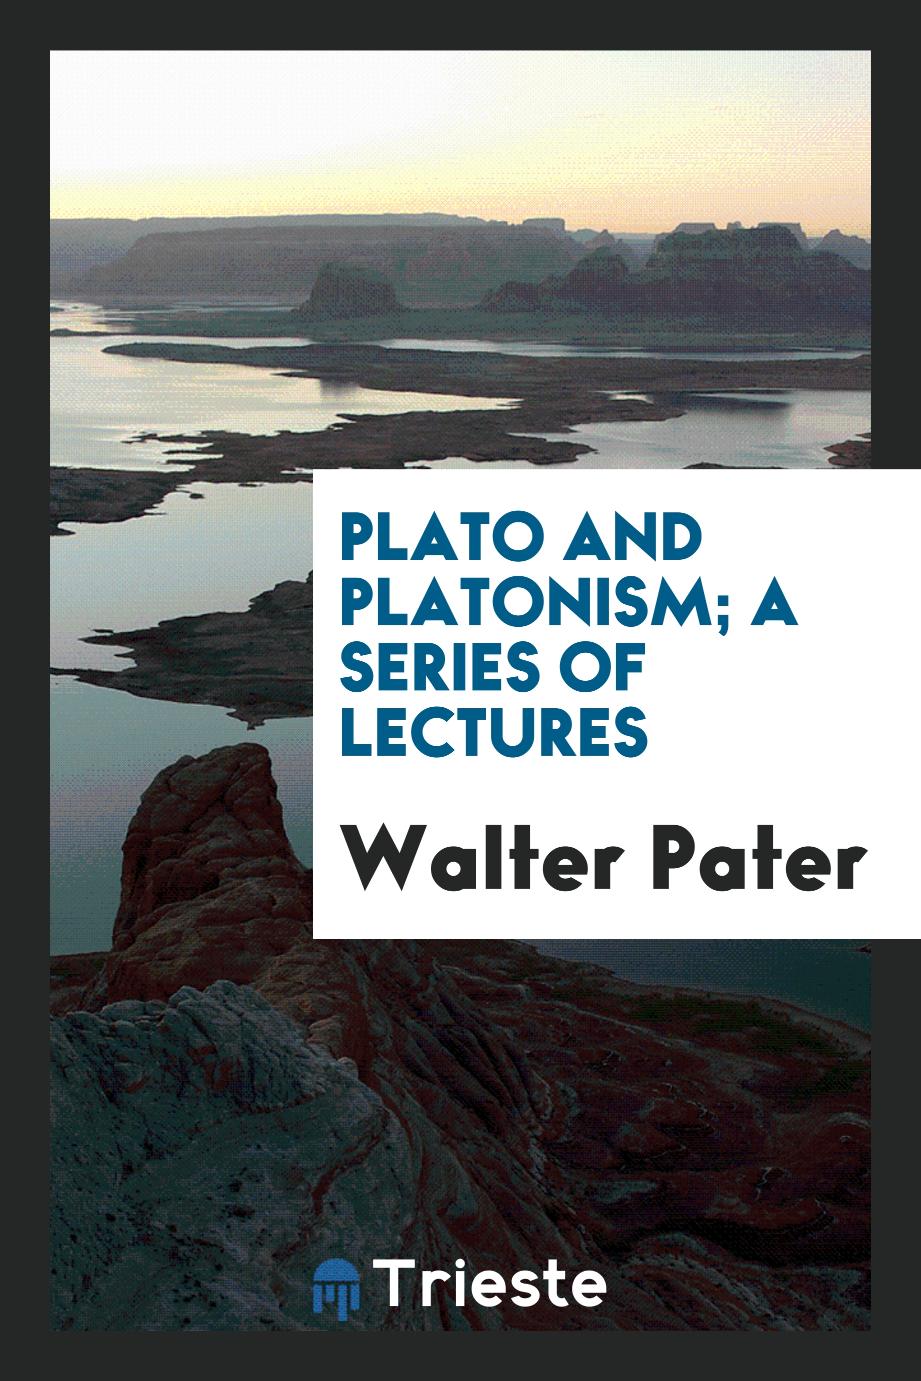 Plato and Platonism; a series of lectures